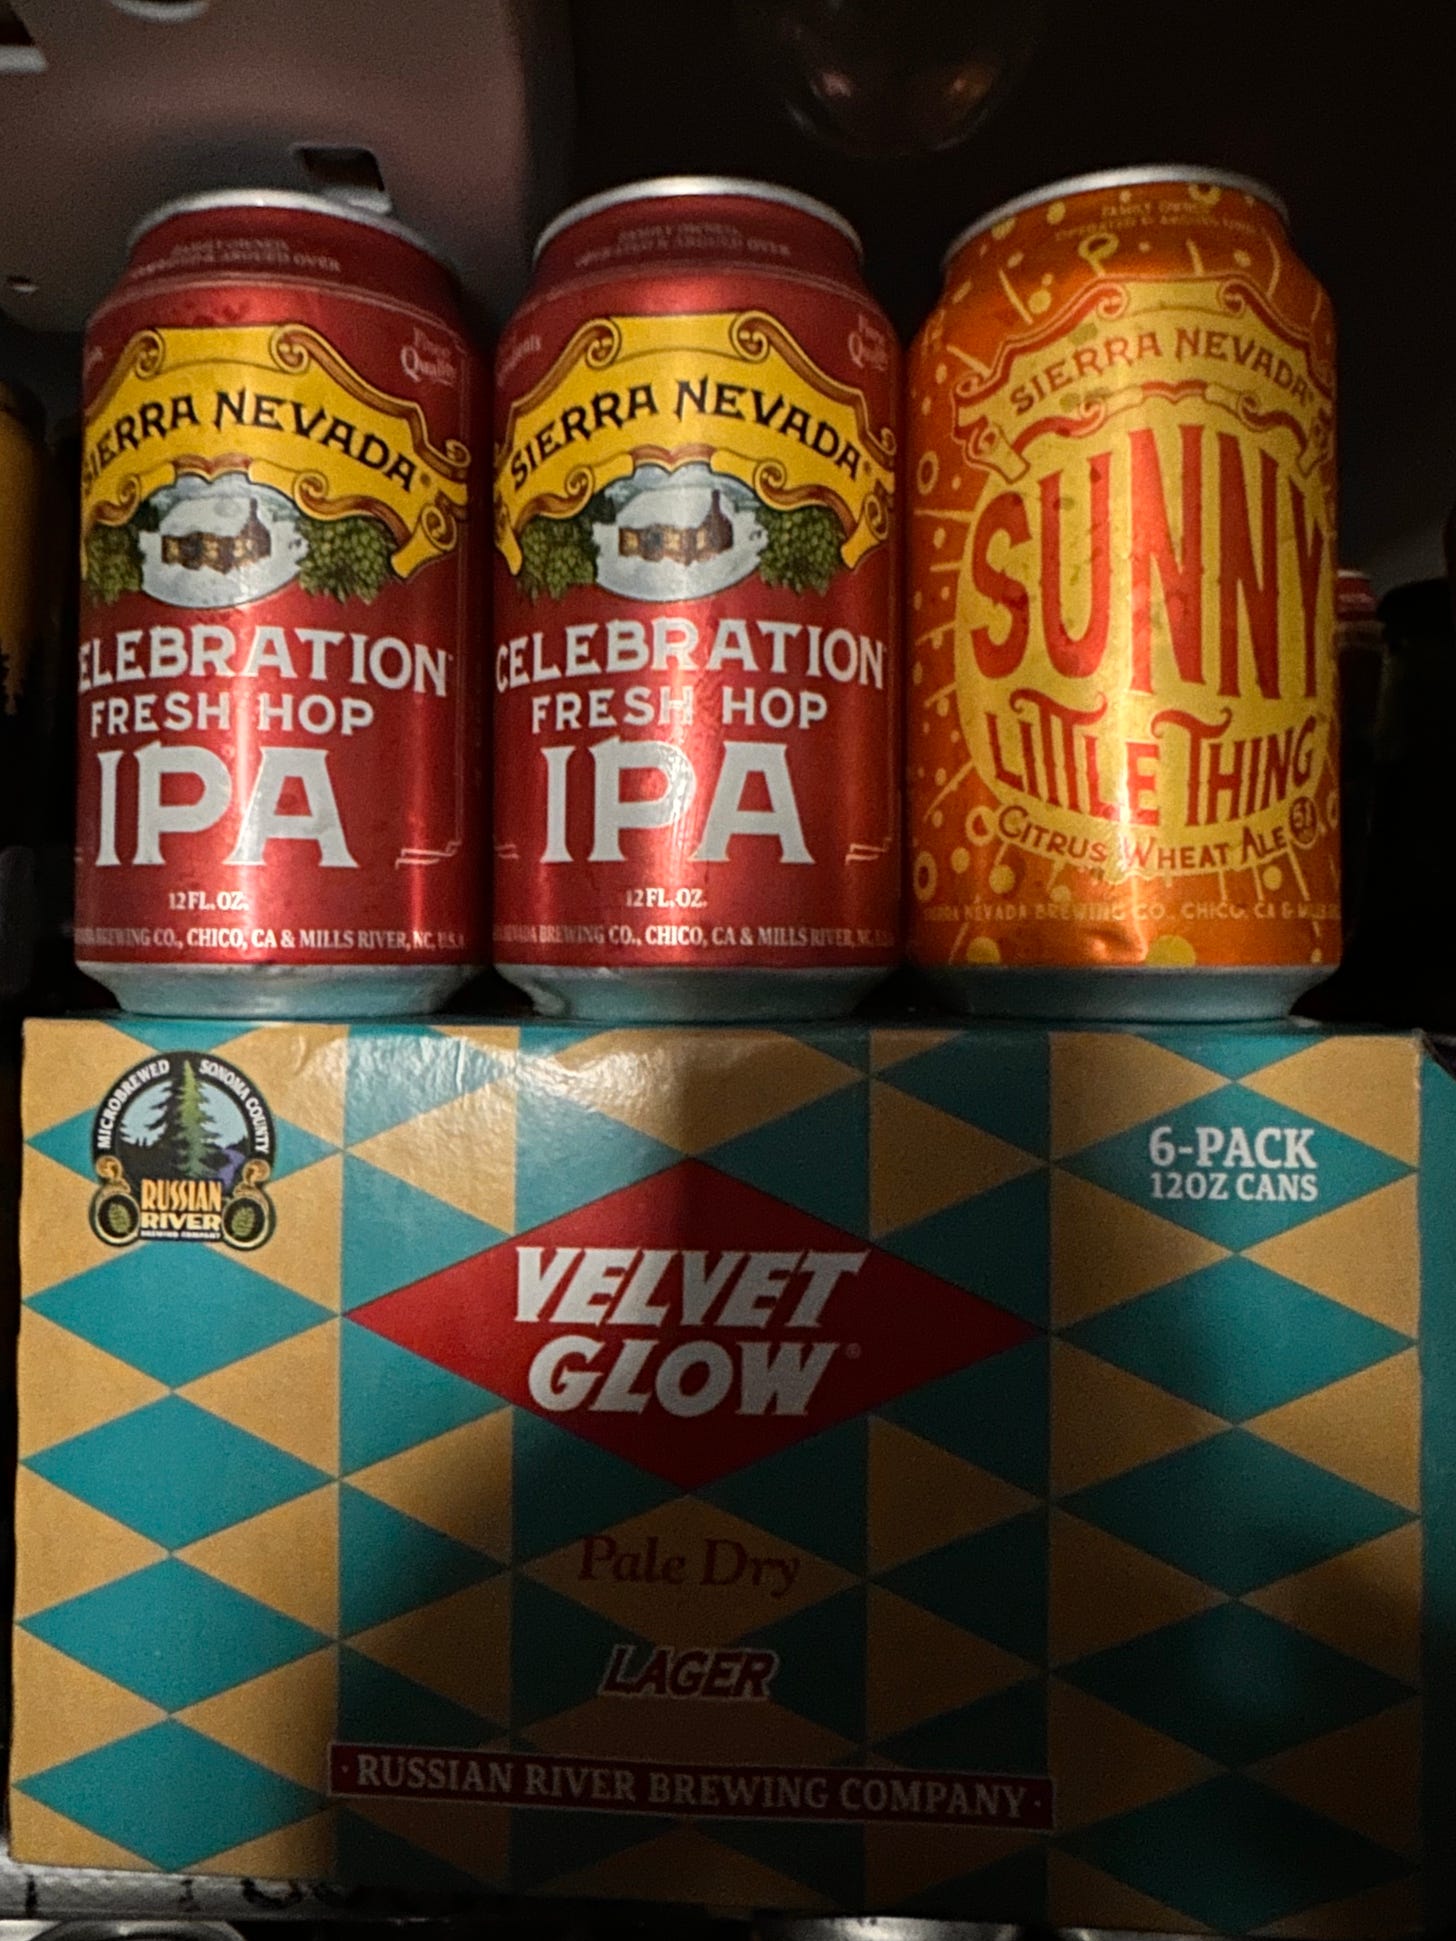 two cans of Celebration Ale next to a can of Sierra Nevada Sunny Little Thing on top of a six pack of Velvet Glow cans from Russian River